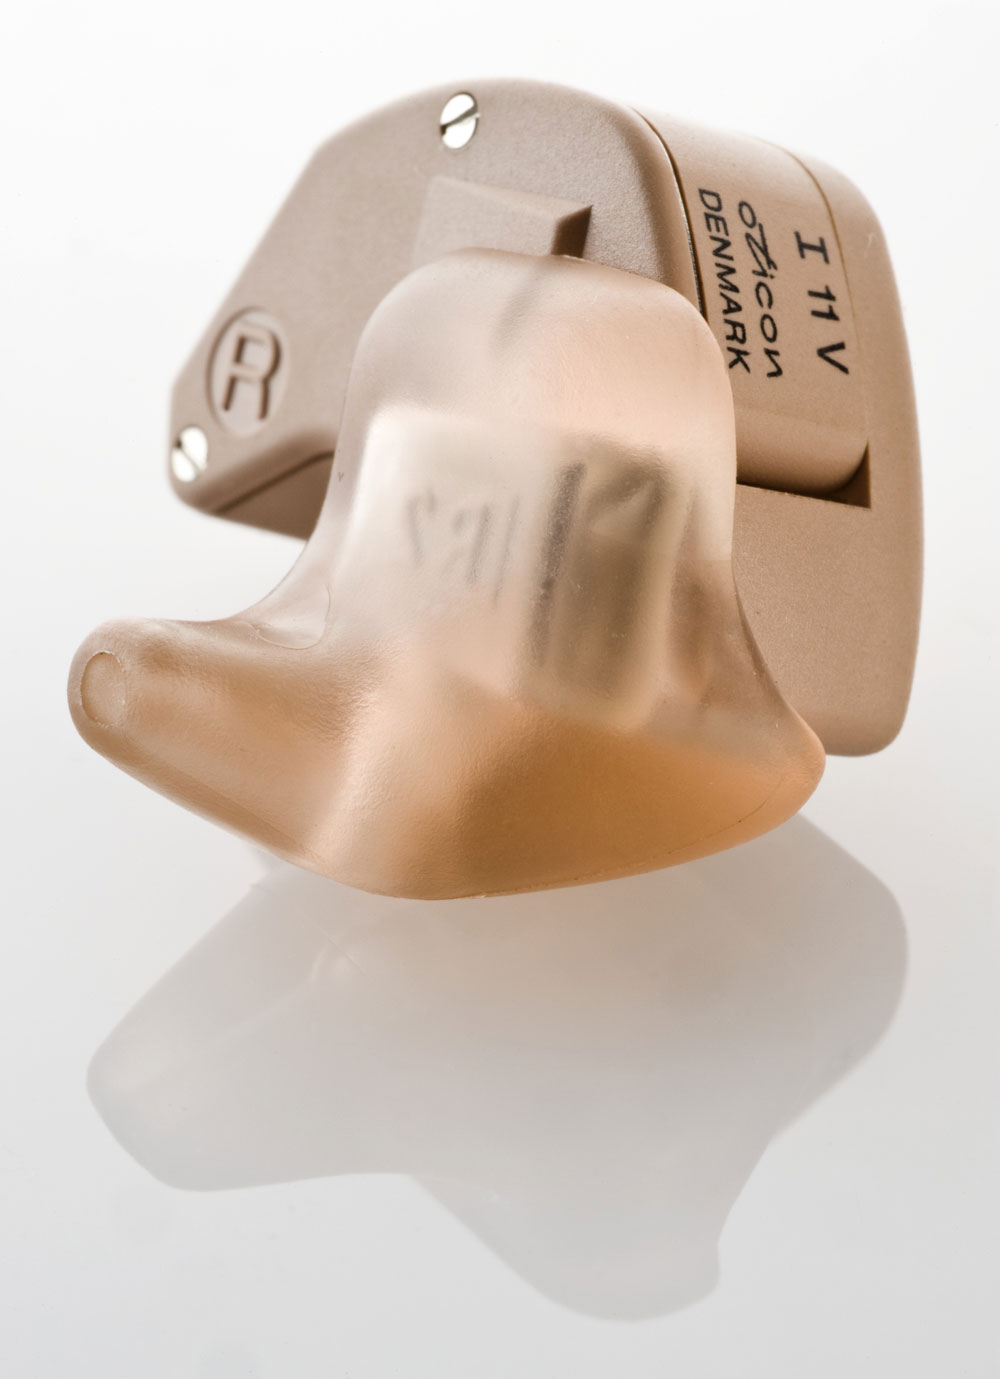 Intra Aural ITC hearing aids